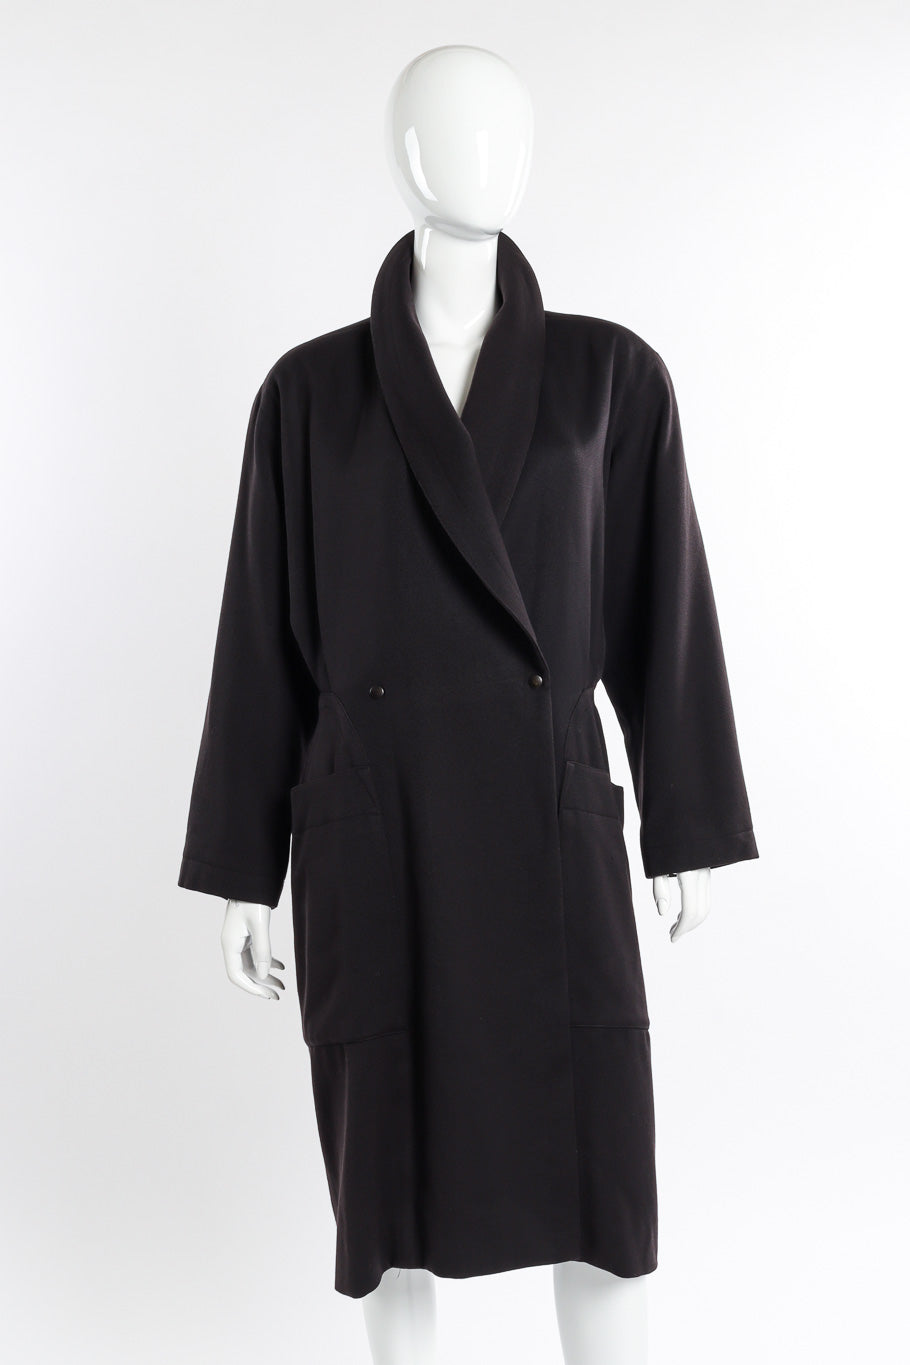 Vintage Alaia Oversized Double Breasted Wool Coat front view on mannequin @recessla